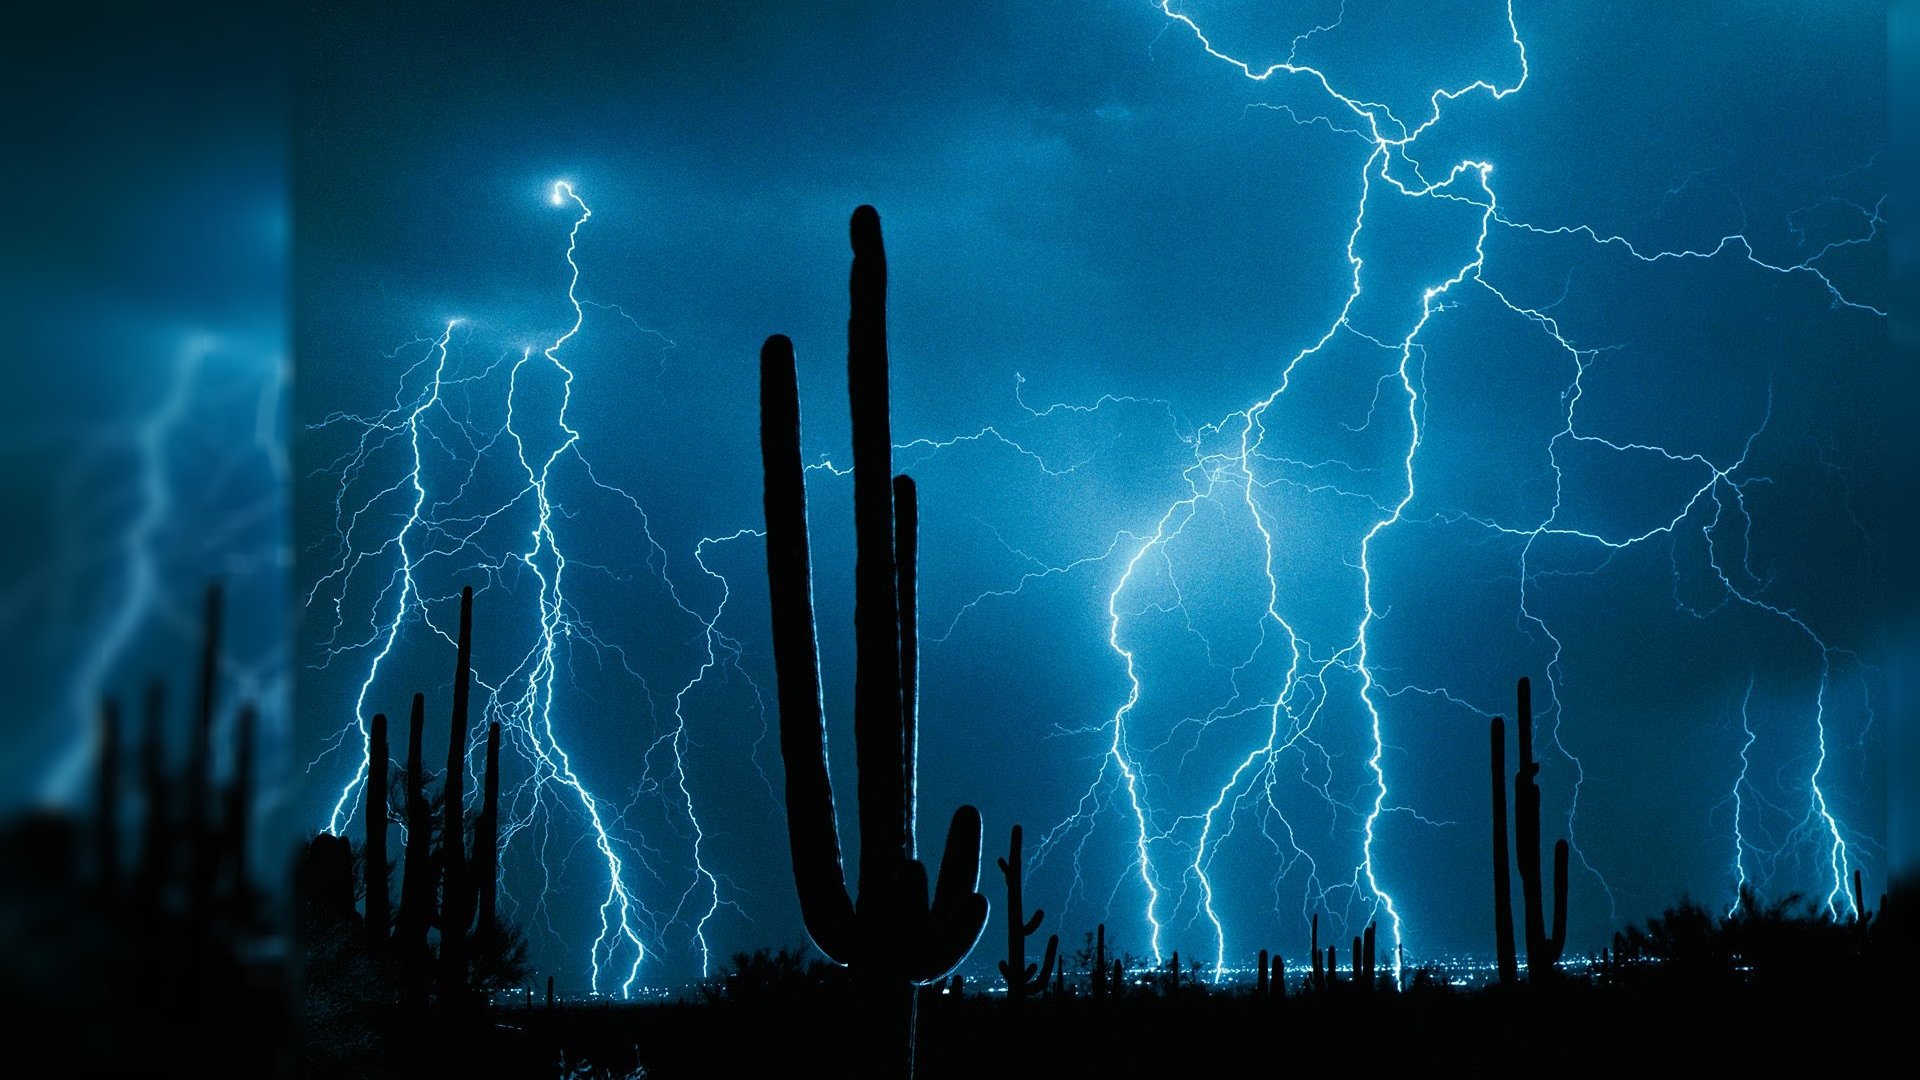 Lightning 4K wallpapers for your desktop or mobile screen free and easy ...